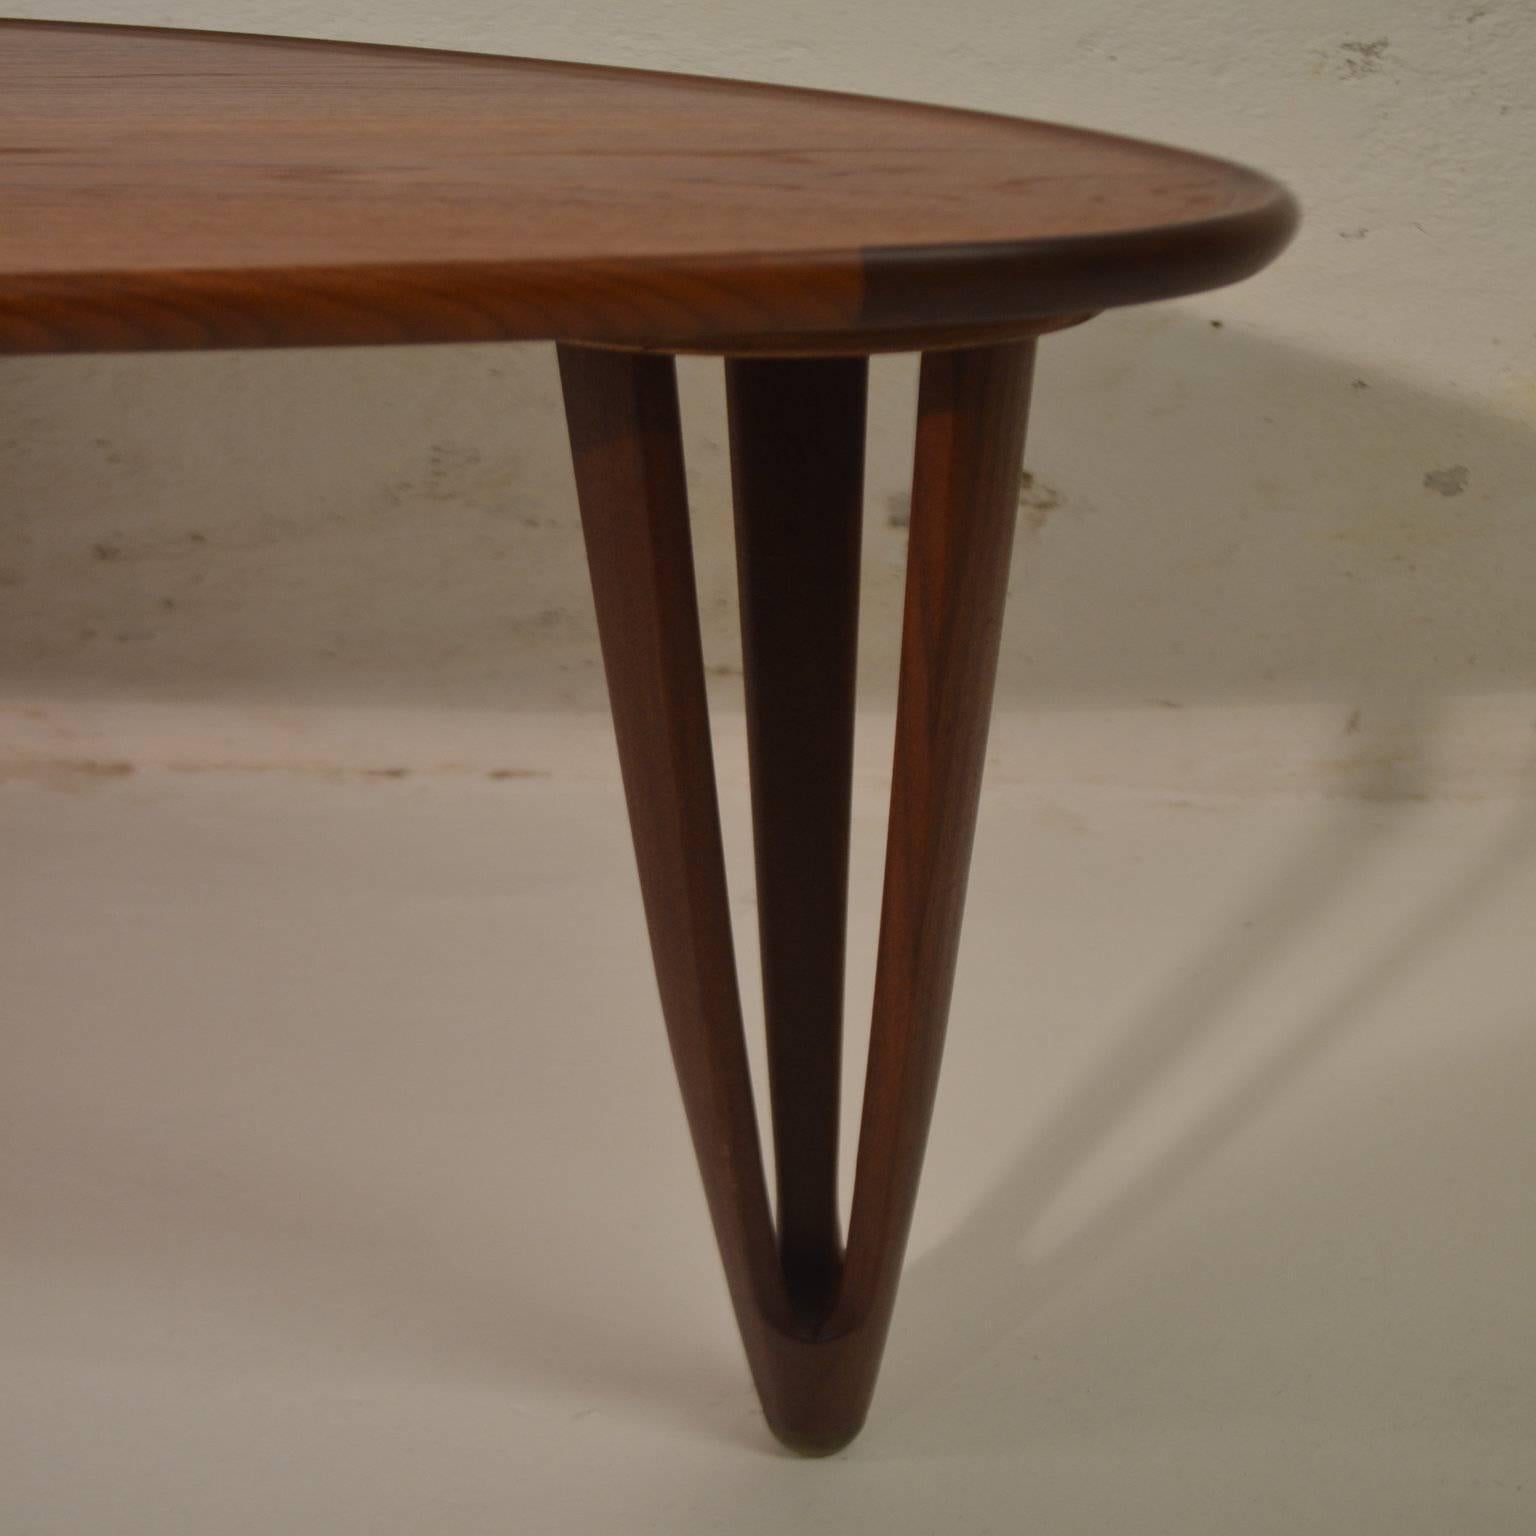 Danish Teak Coffee Table by B C Mobler, Denmark In Good Condition For Sale In Harrogate, North Yorkshire